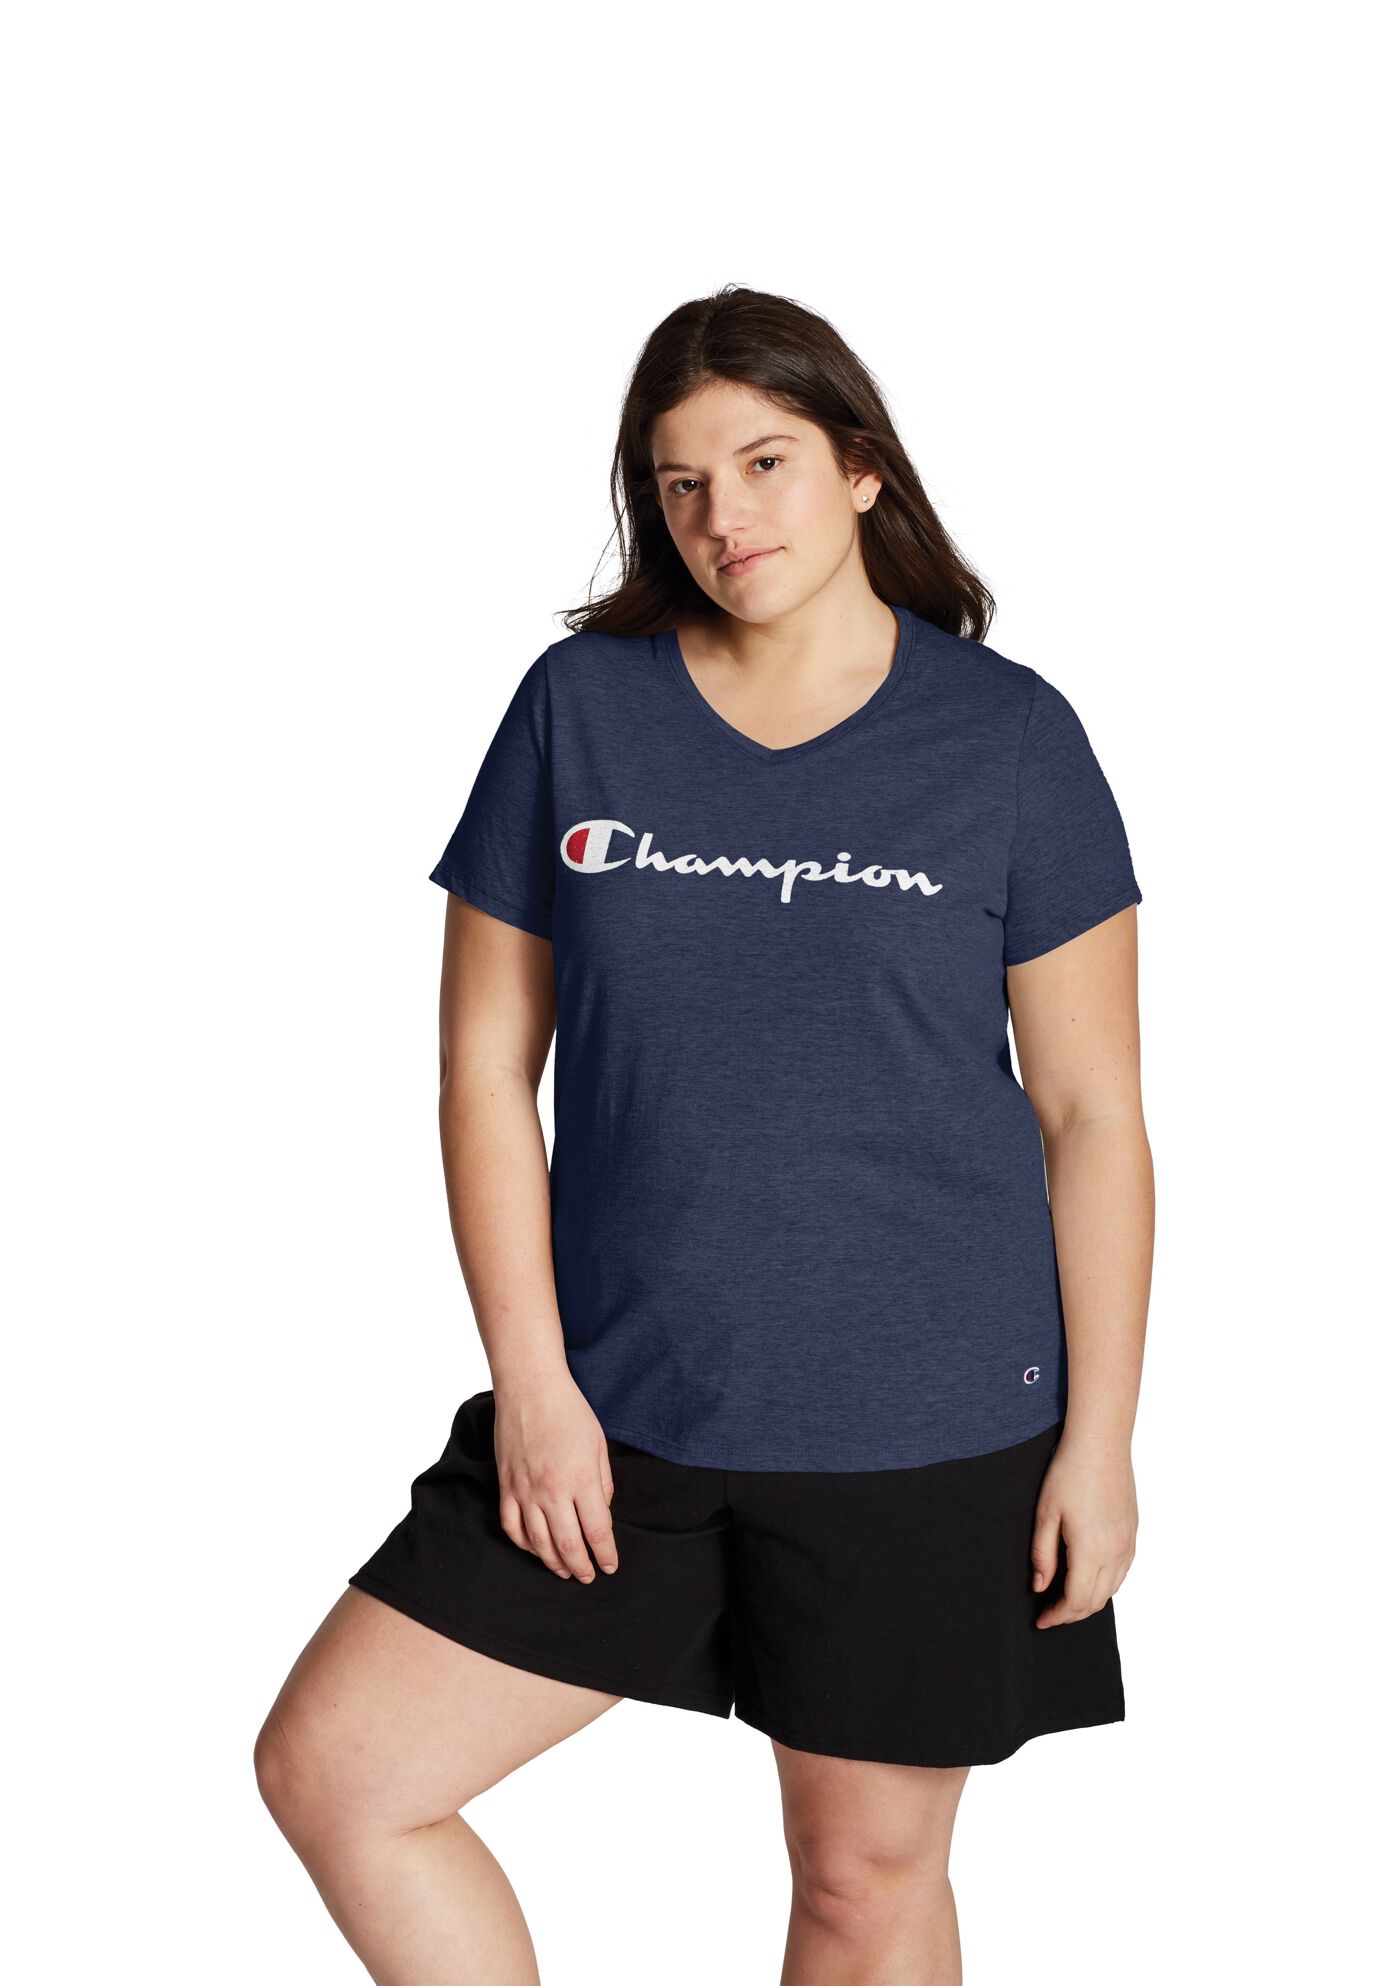 Plus Size Women's Jersey V-Neck Tee Graphic-Classic Script by Champion in Imperial Indigo Heather (Size 1X)